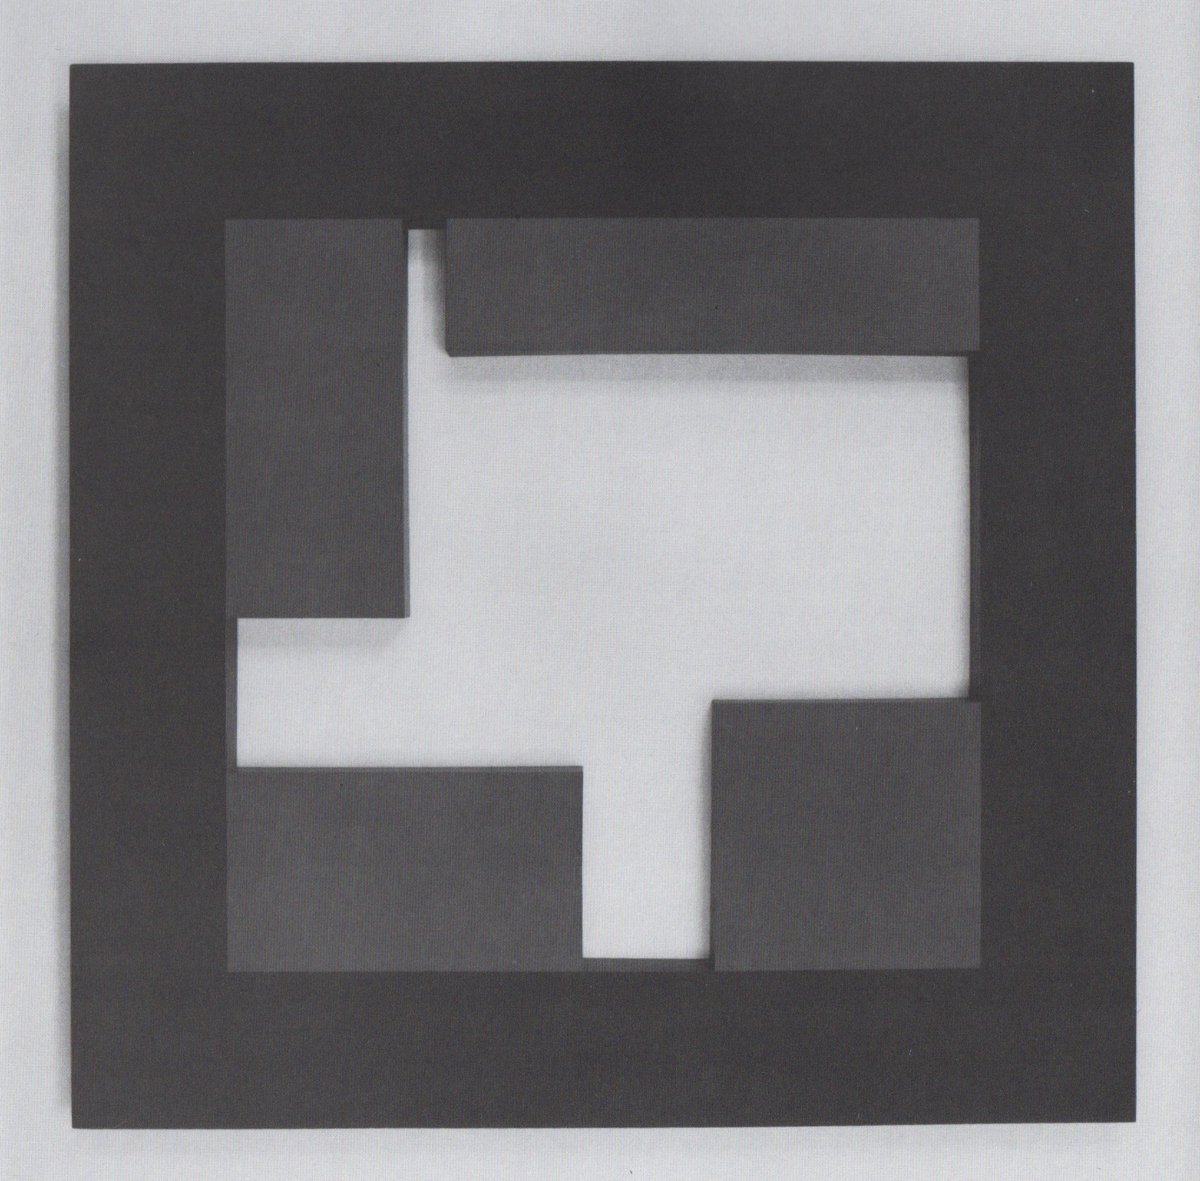 (fig. 3) &quot;equal areas within a square&quot; (1983), oil on plywood, 120 x 120 cm